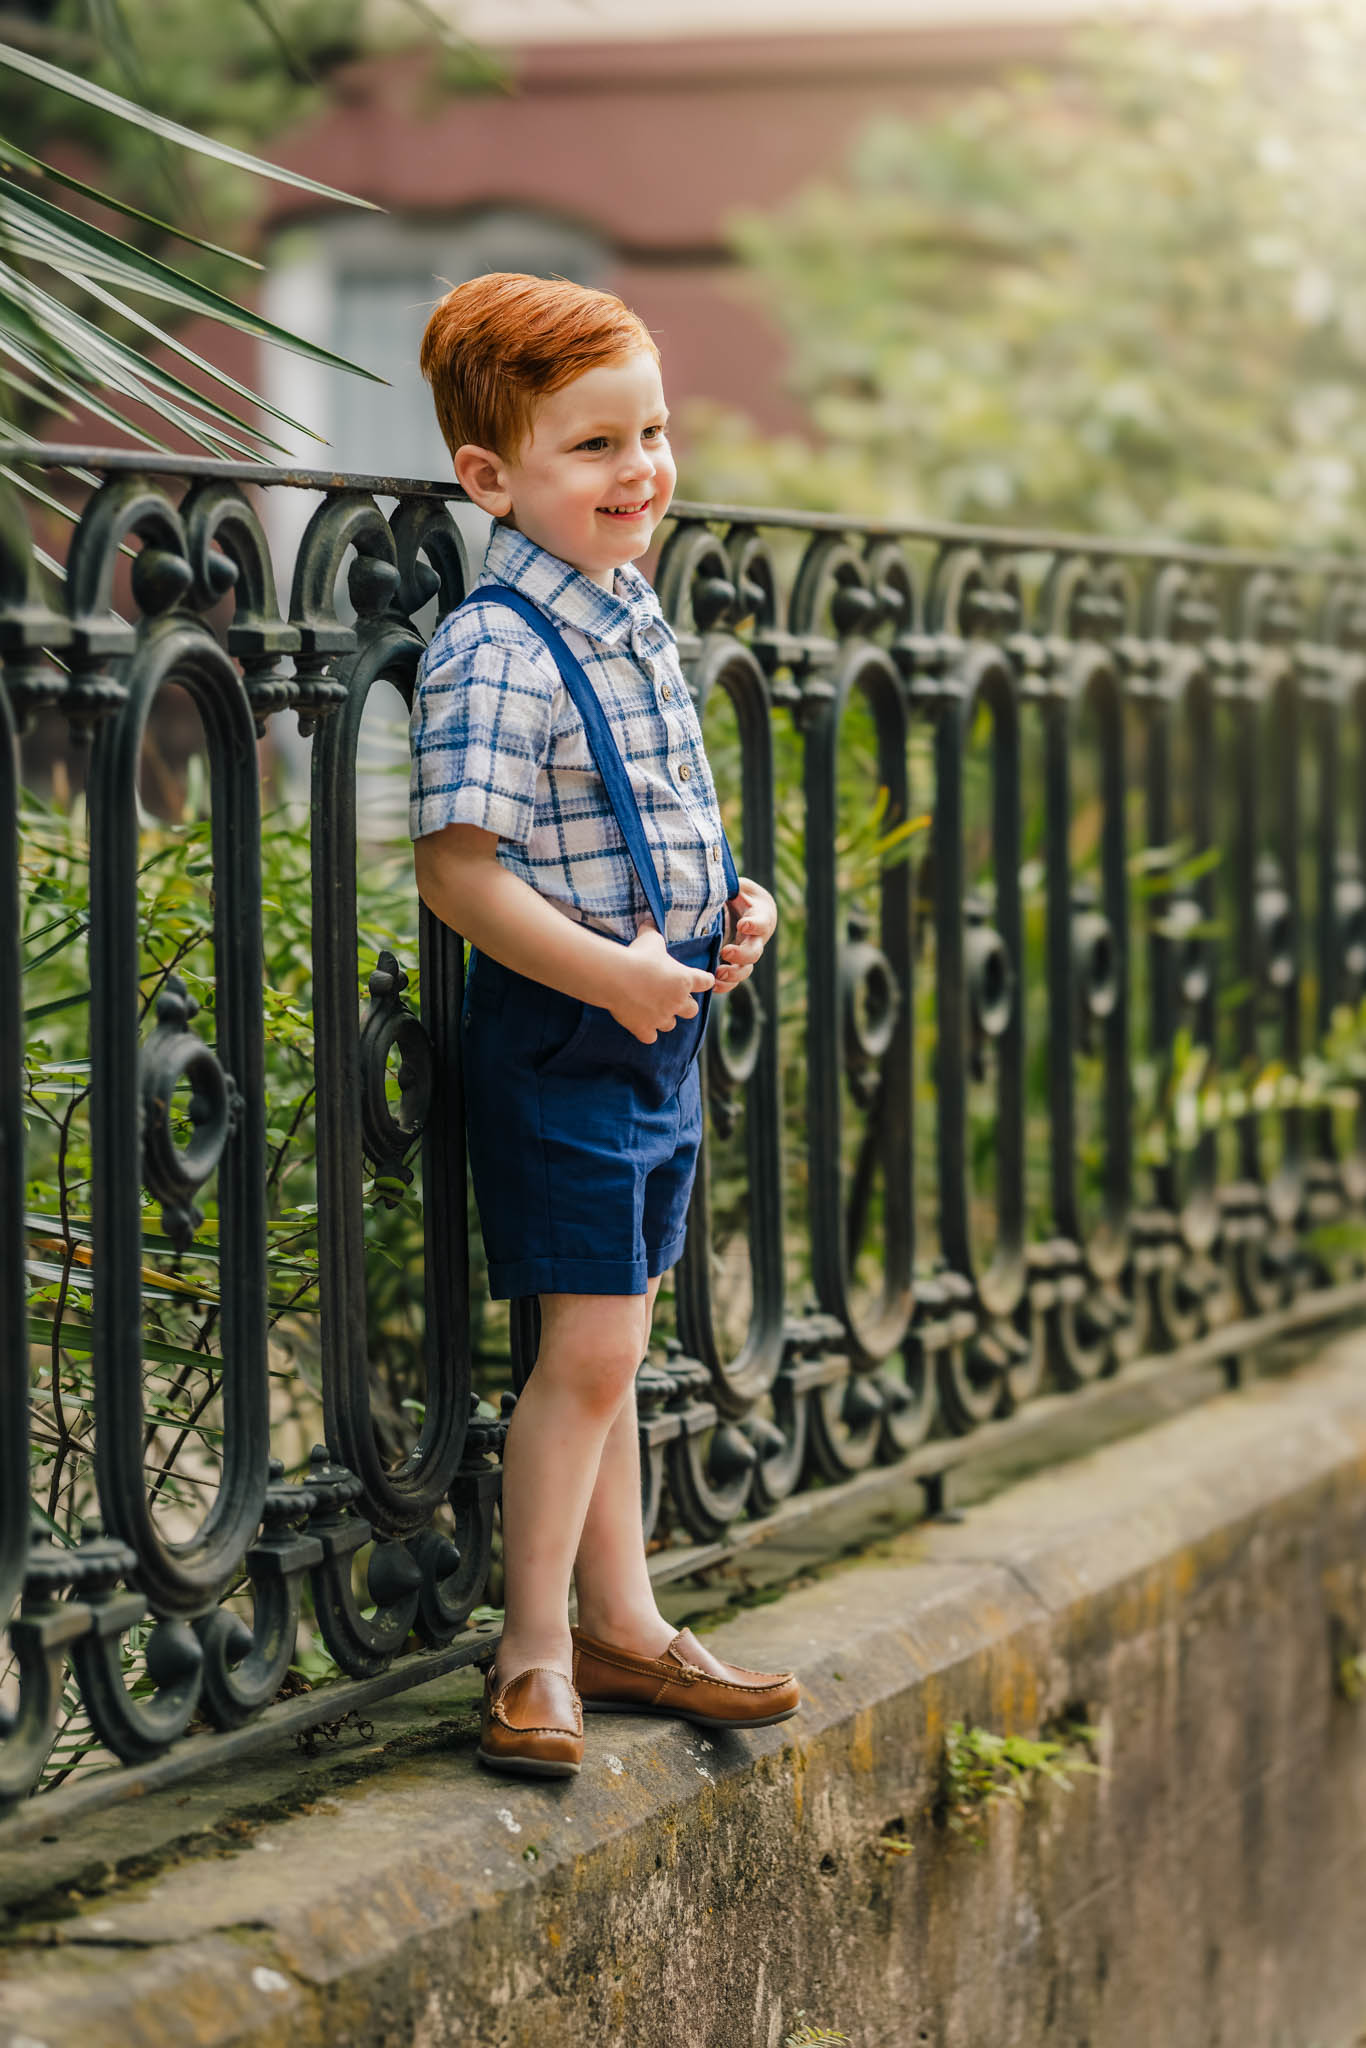 A young boy stands on a fence holding his blue suspenders and leaning on an iron fence things to do in asheville with kids